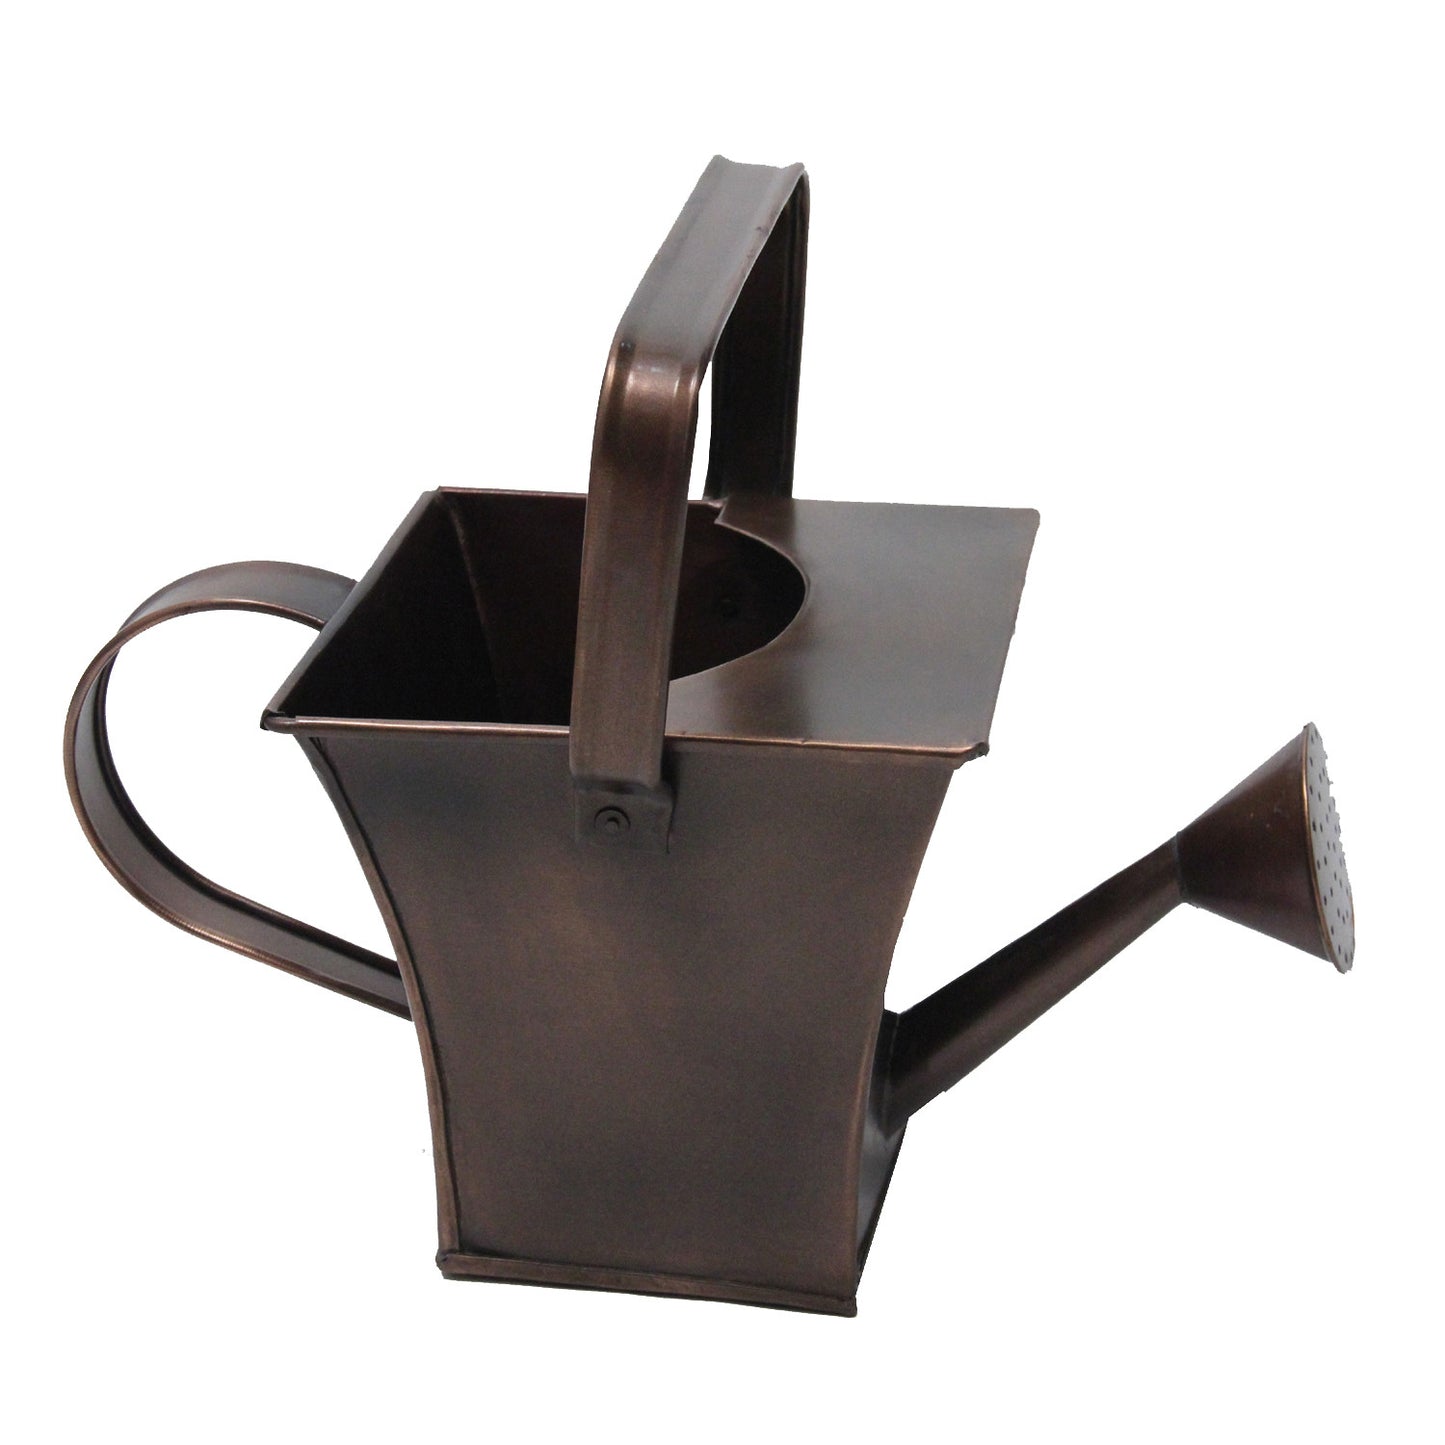 GiftBay Watering Can, Metal With Dual Handle 7" High, Small 0.6 Gallon, Antique Copper Finish